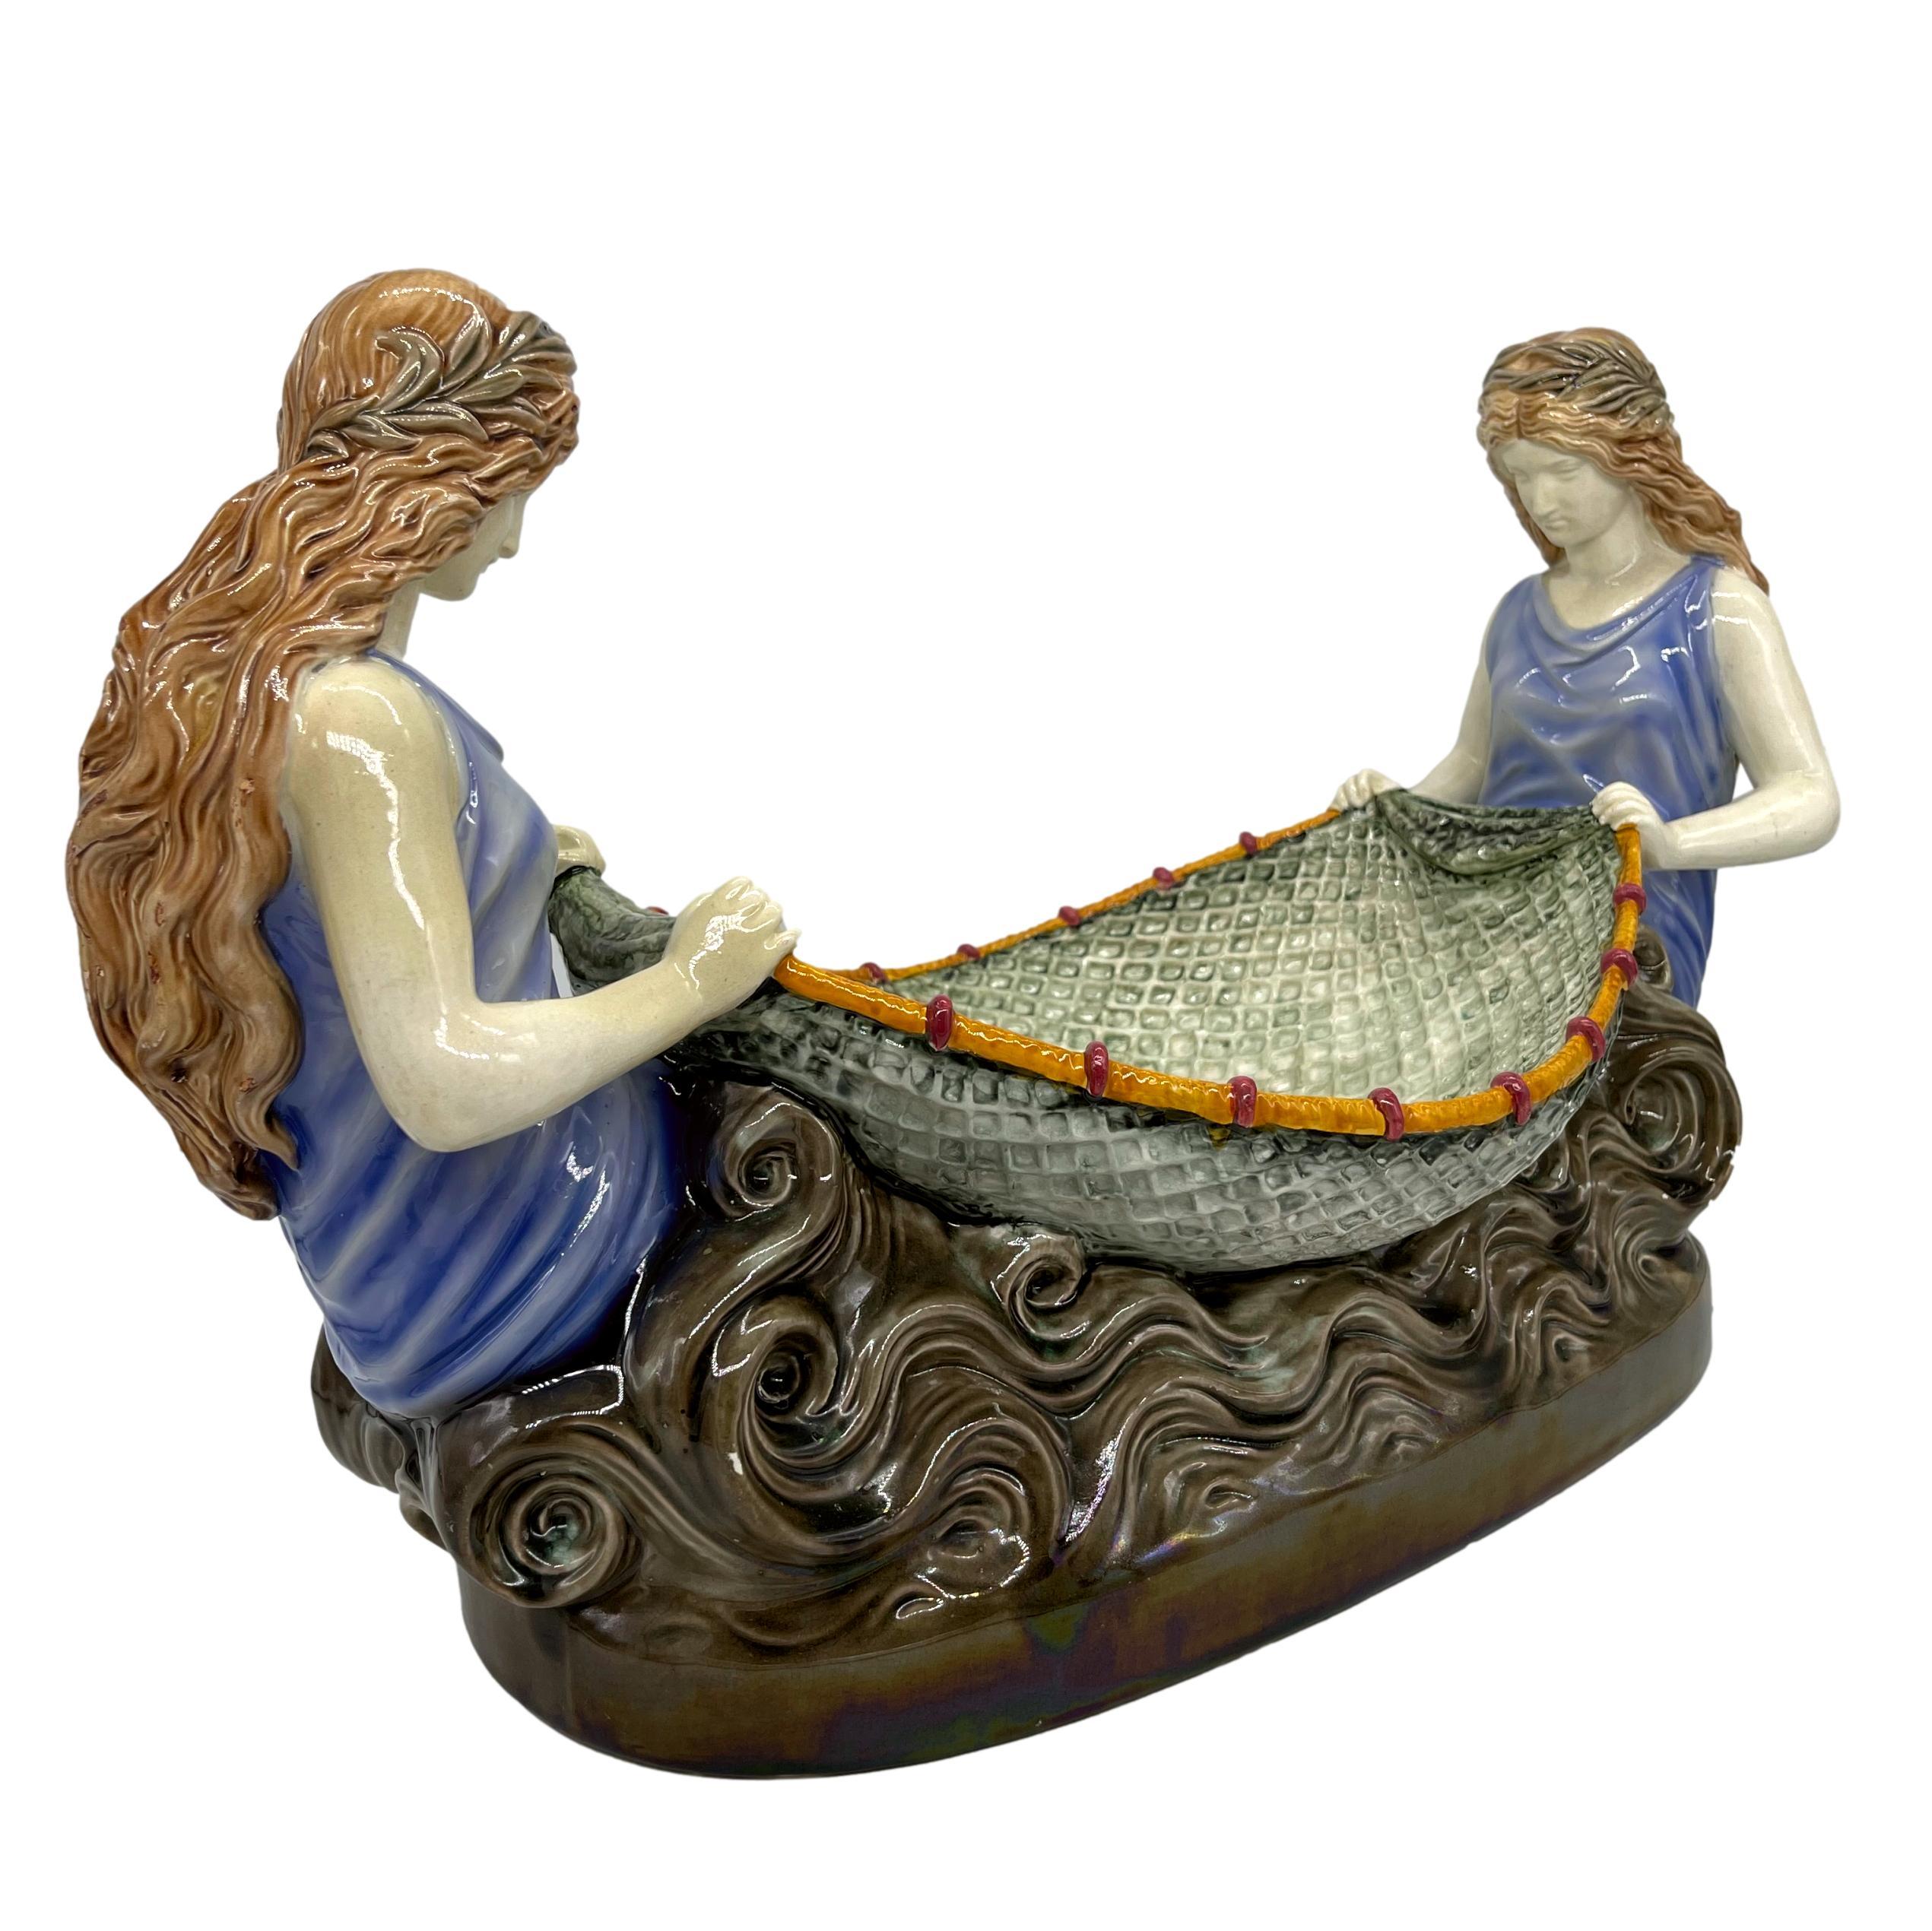 Wedgwood Majolica Figural Centerpiece, modelled as two pre-Raphaelite naiads with a fishing net forming the bowl, in simulated waves, the reverse with impressed marks: 'WEDGWOOD,' and date letters 'DEK' for December 1882. The design number, 797,